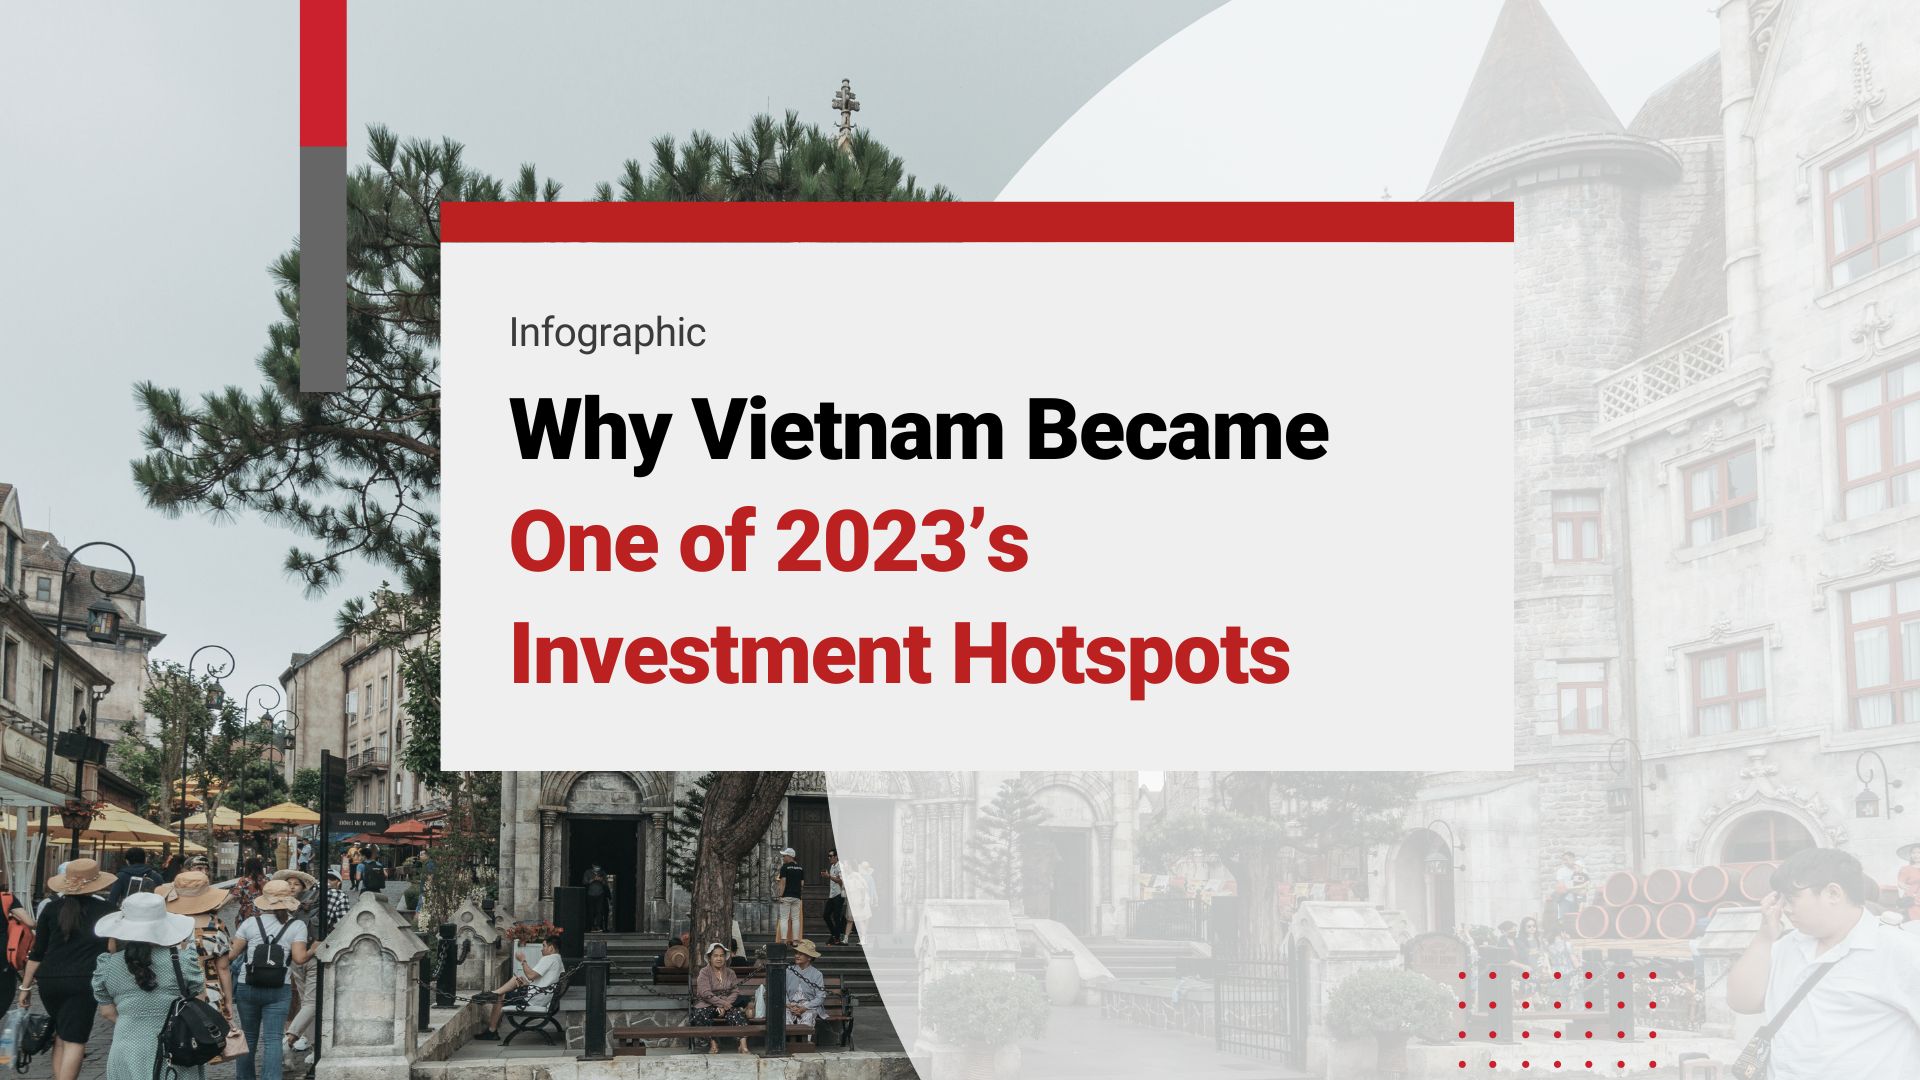 Vietnam Became One of 2023’s Investment Hotspots